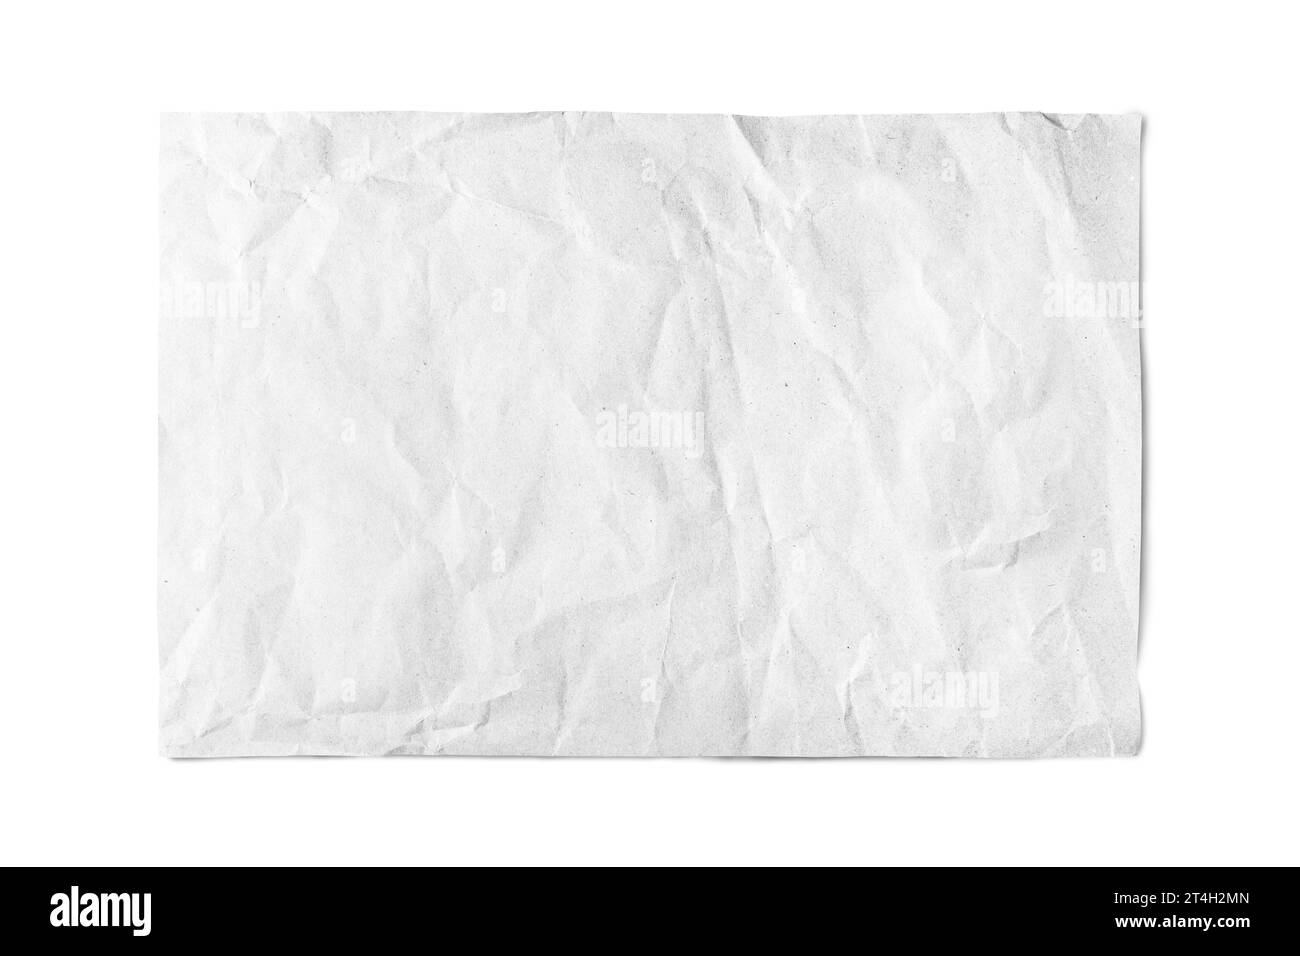 White crumpled rectangle sheet of paper with smooth edge isolated on white background. Recycled craft paper wrinkled, creased texture, grunge border. Stock Photo